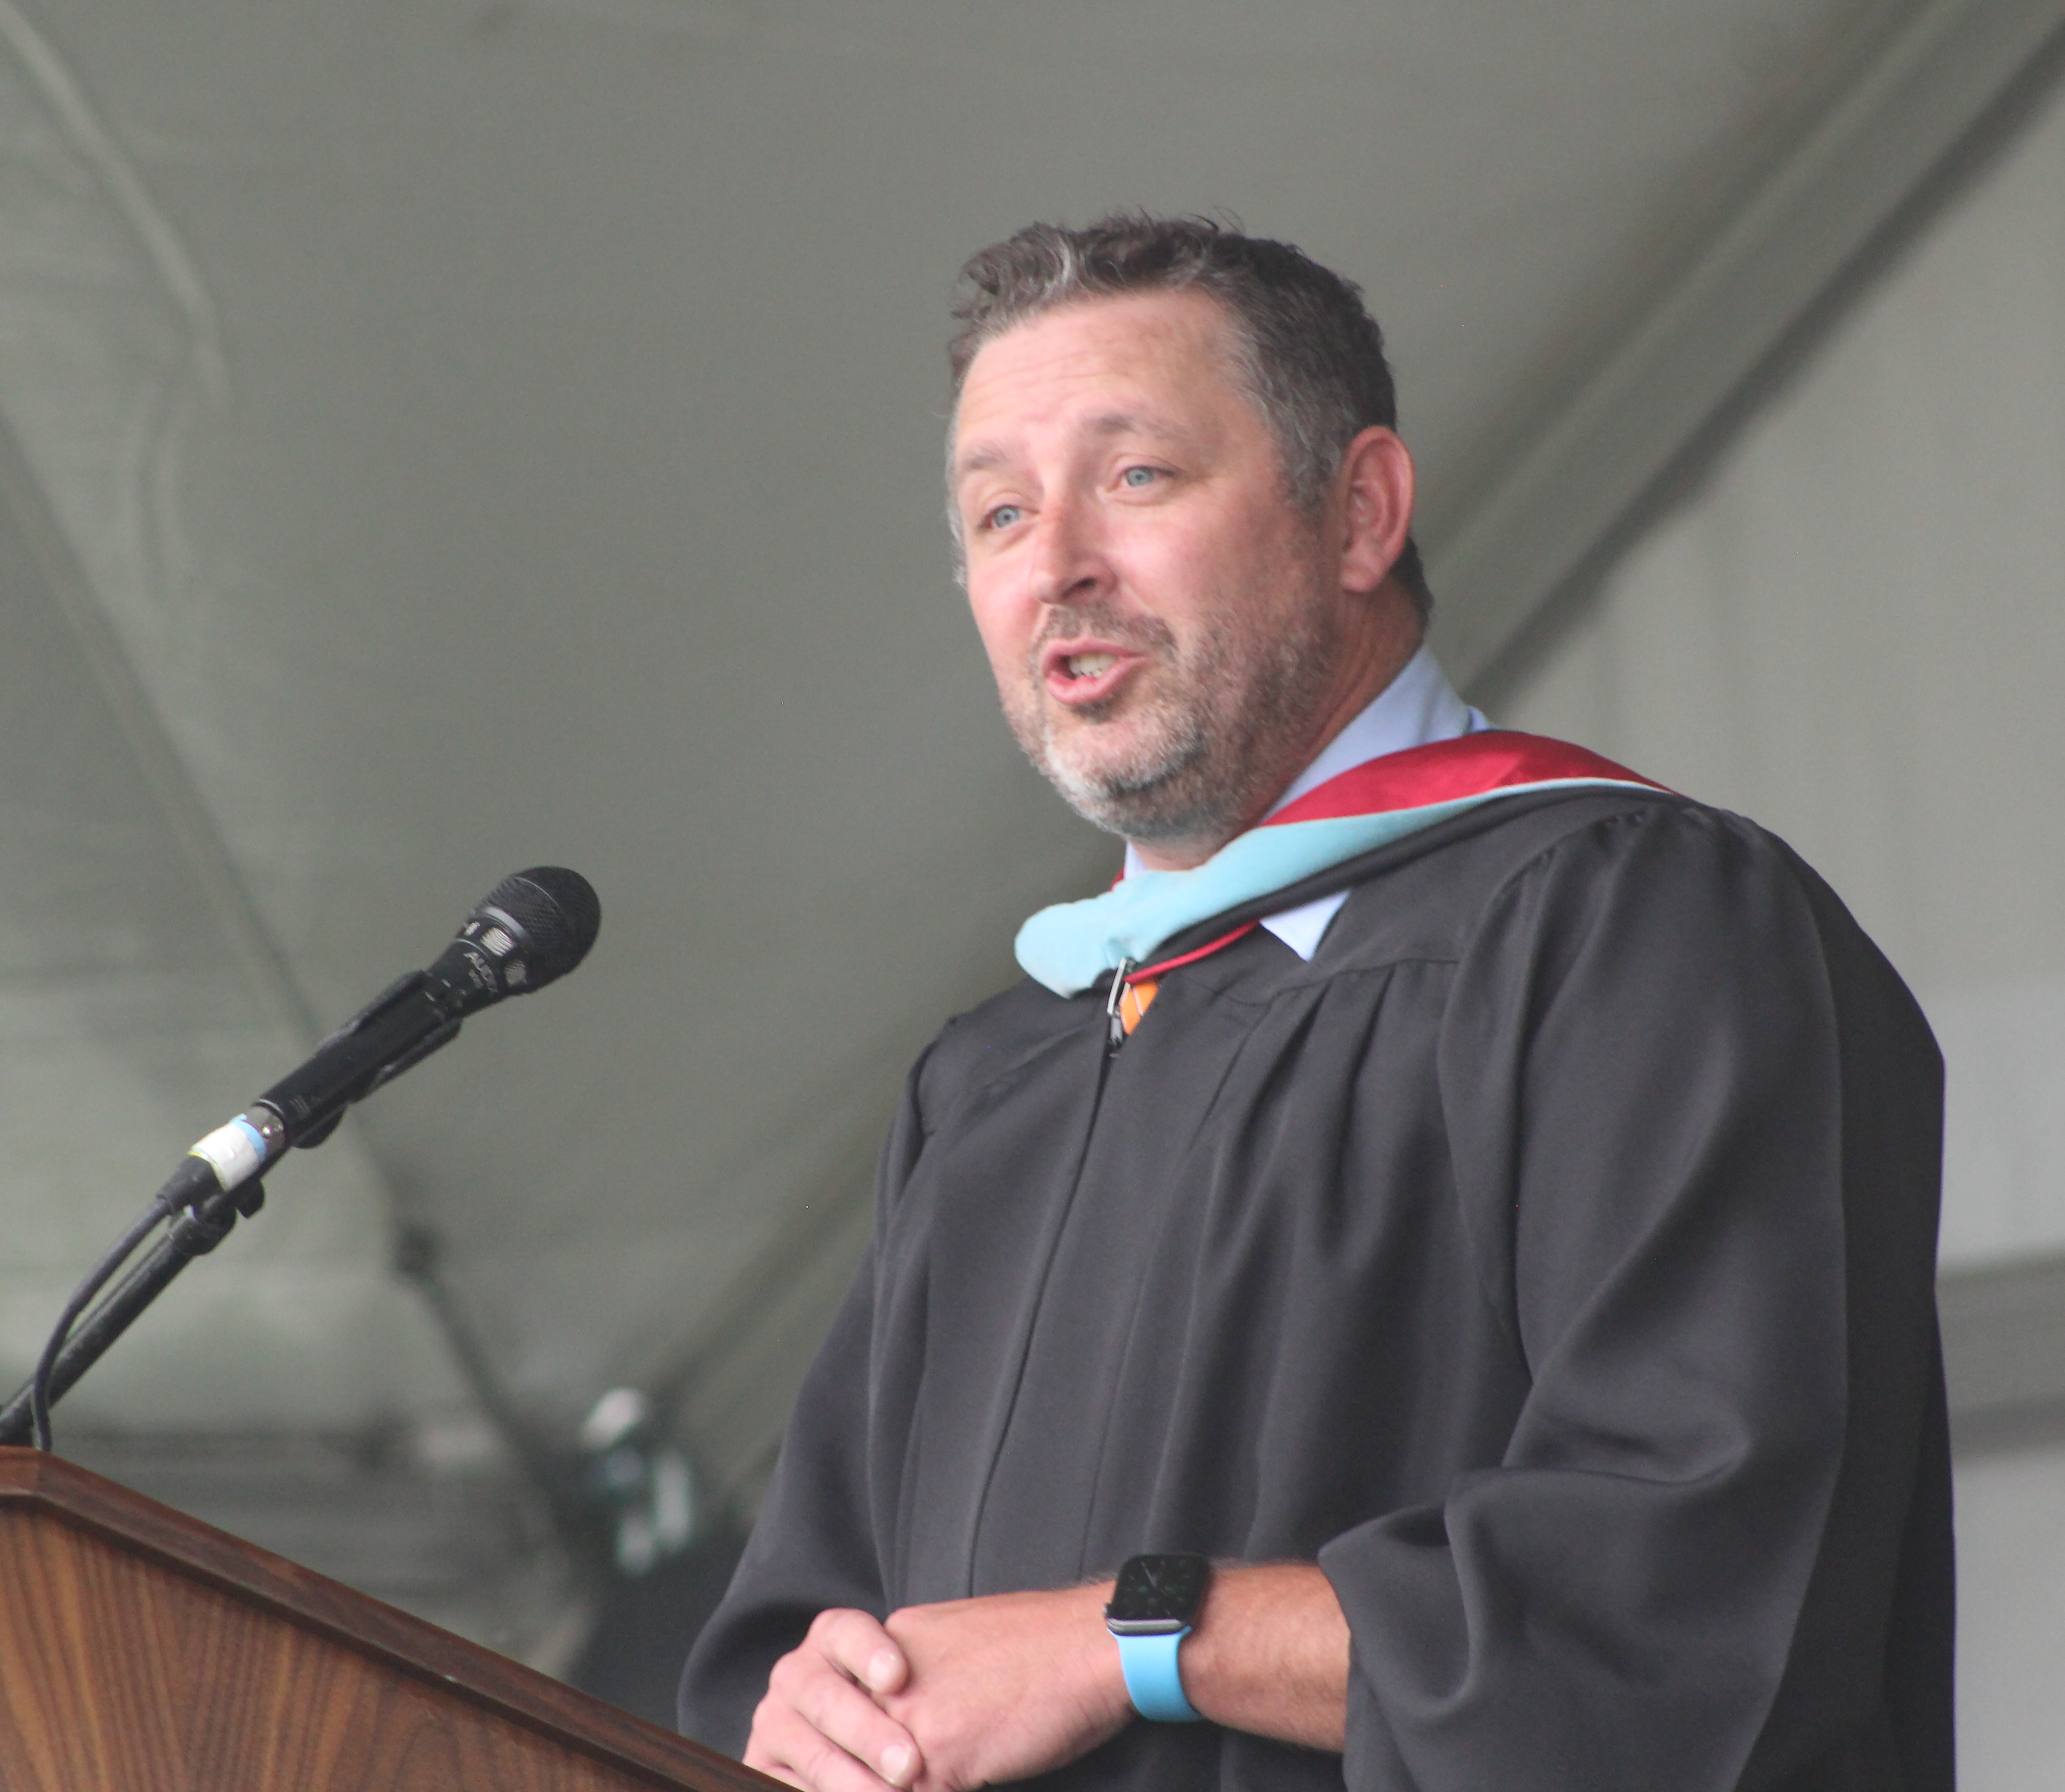 Washougal High School history teacher Jim Reed speaks during the school's graduation ceremony on Saturday, June 12, at Fishback Stadium in Washougal. (Doug Flanagan/Post-Record)